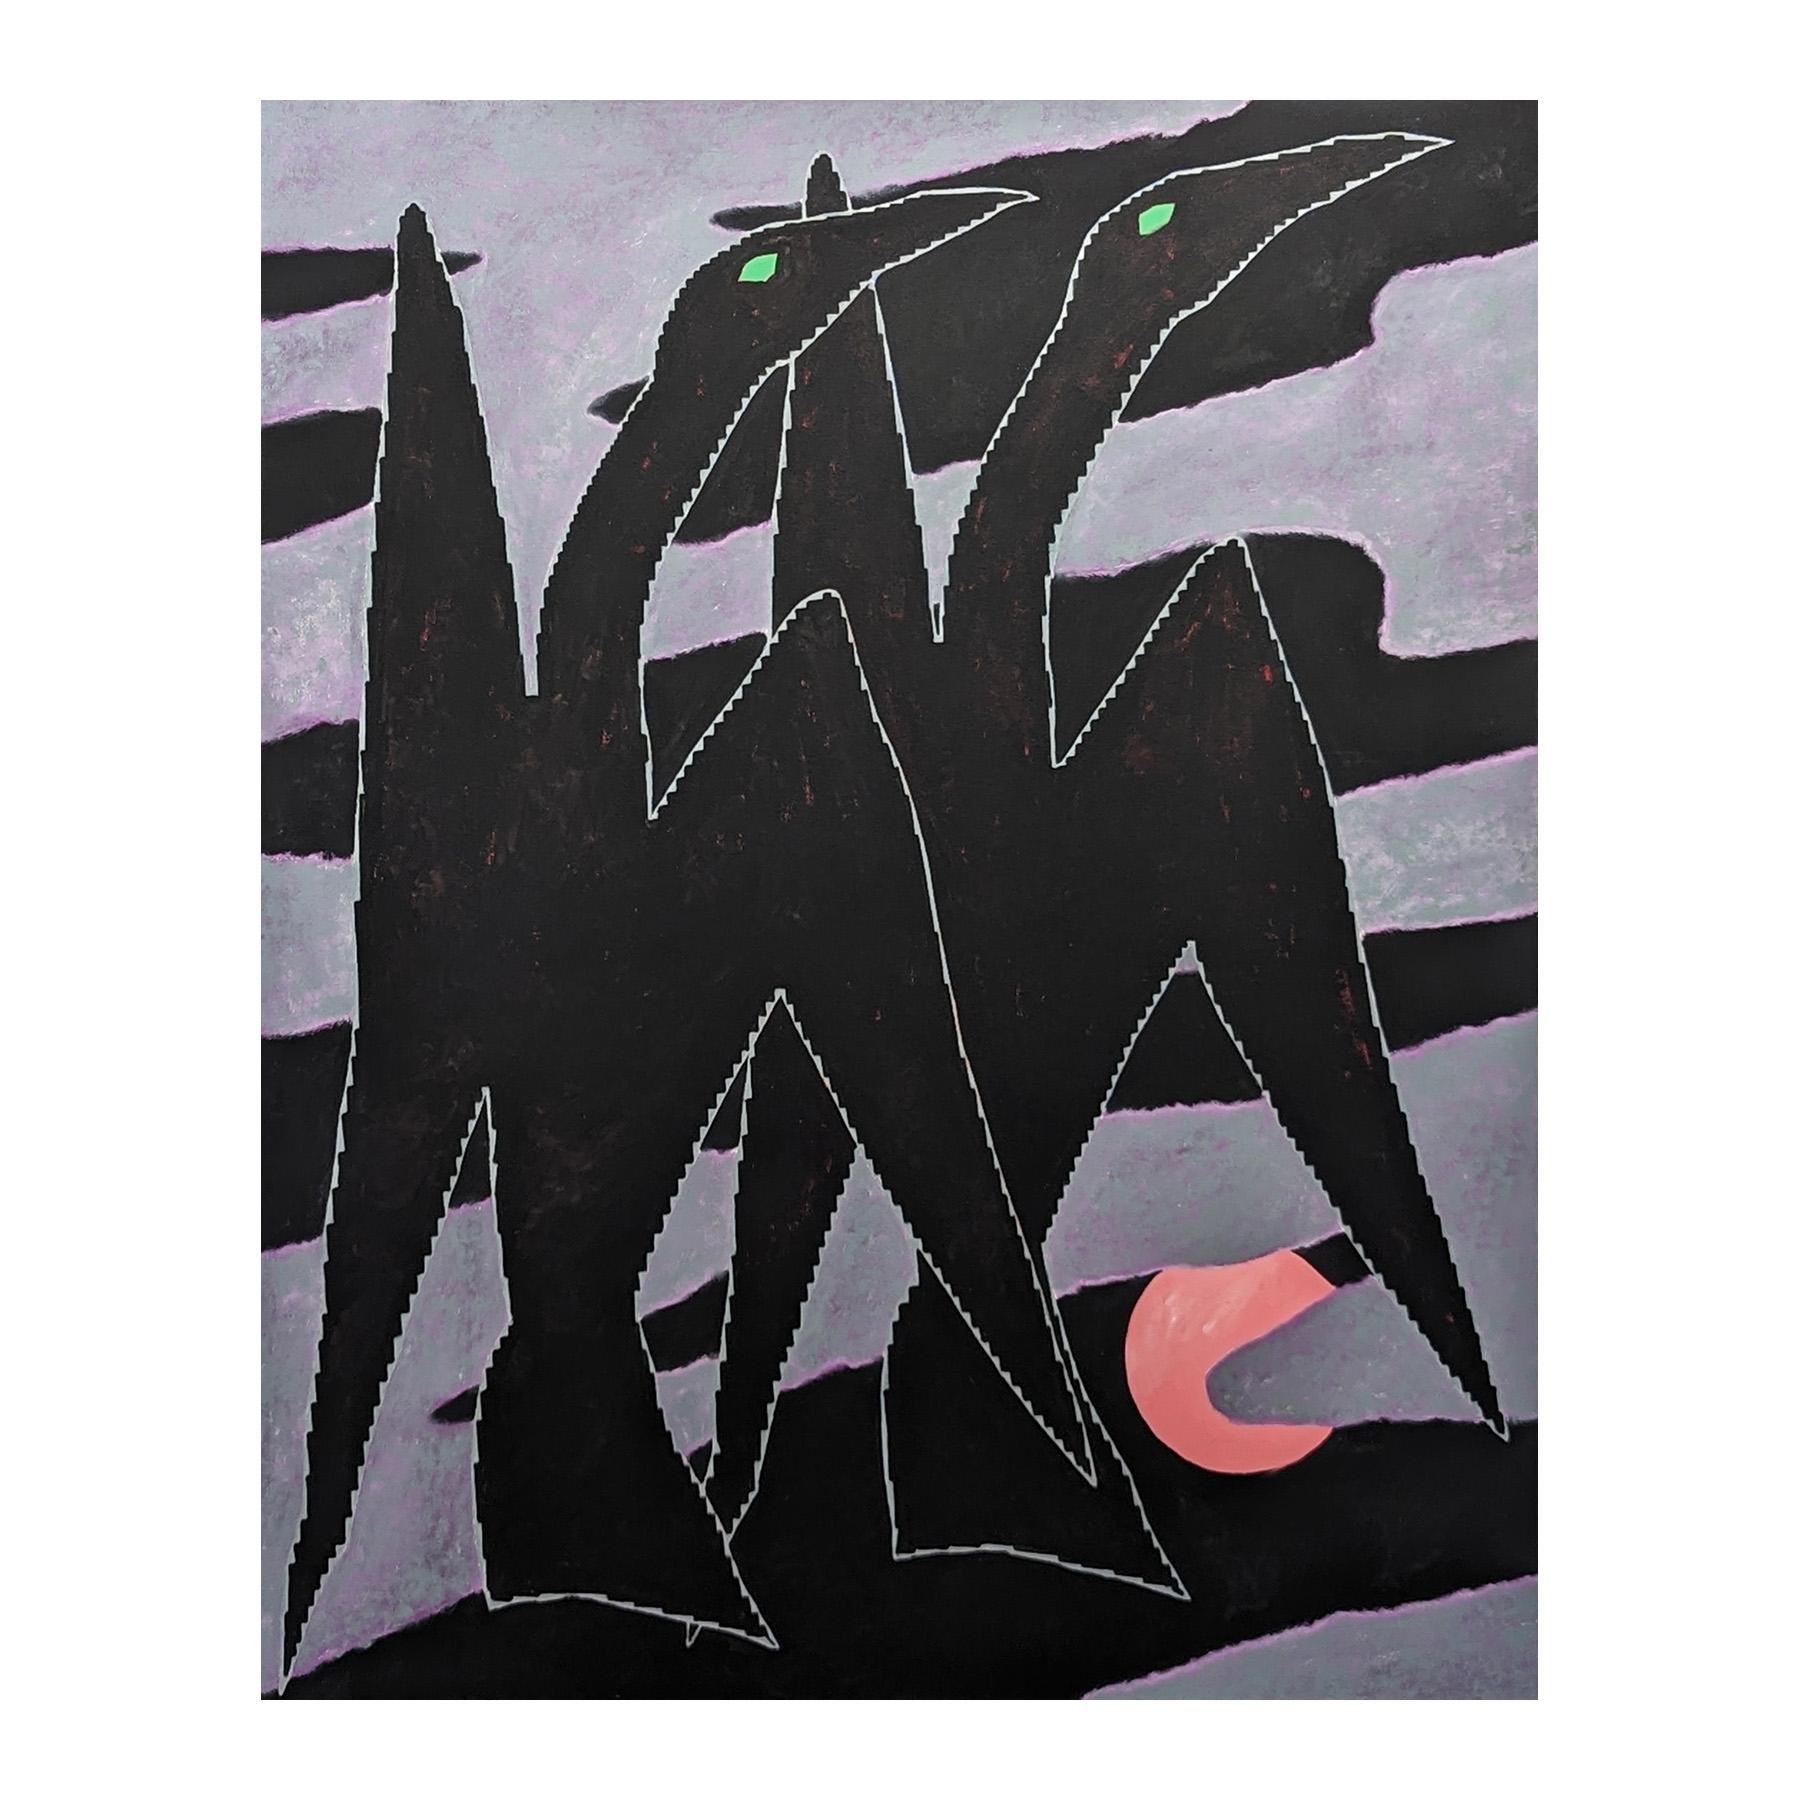 Contemporary abstract painting by local Houston artist Emmanuel Araujo. The work features a pair of birds with green eyes flying over purple and black toned water. Signed, titled, and dated on the reverse. Currently unframed, but options are